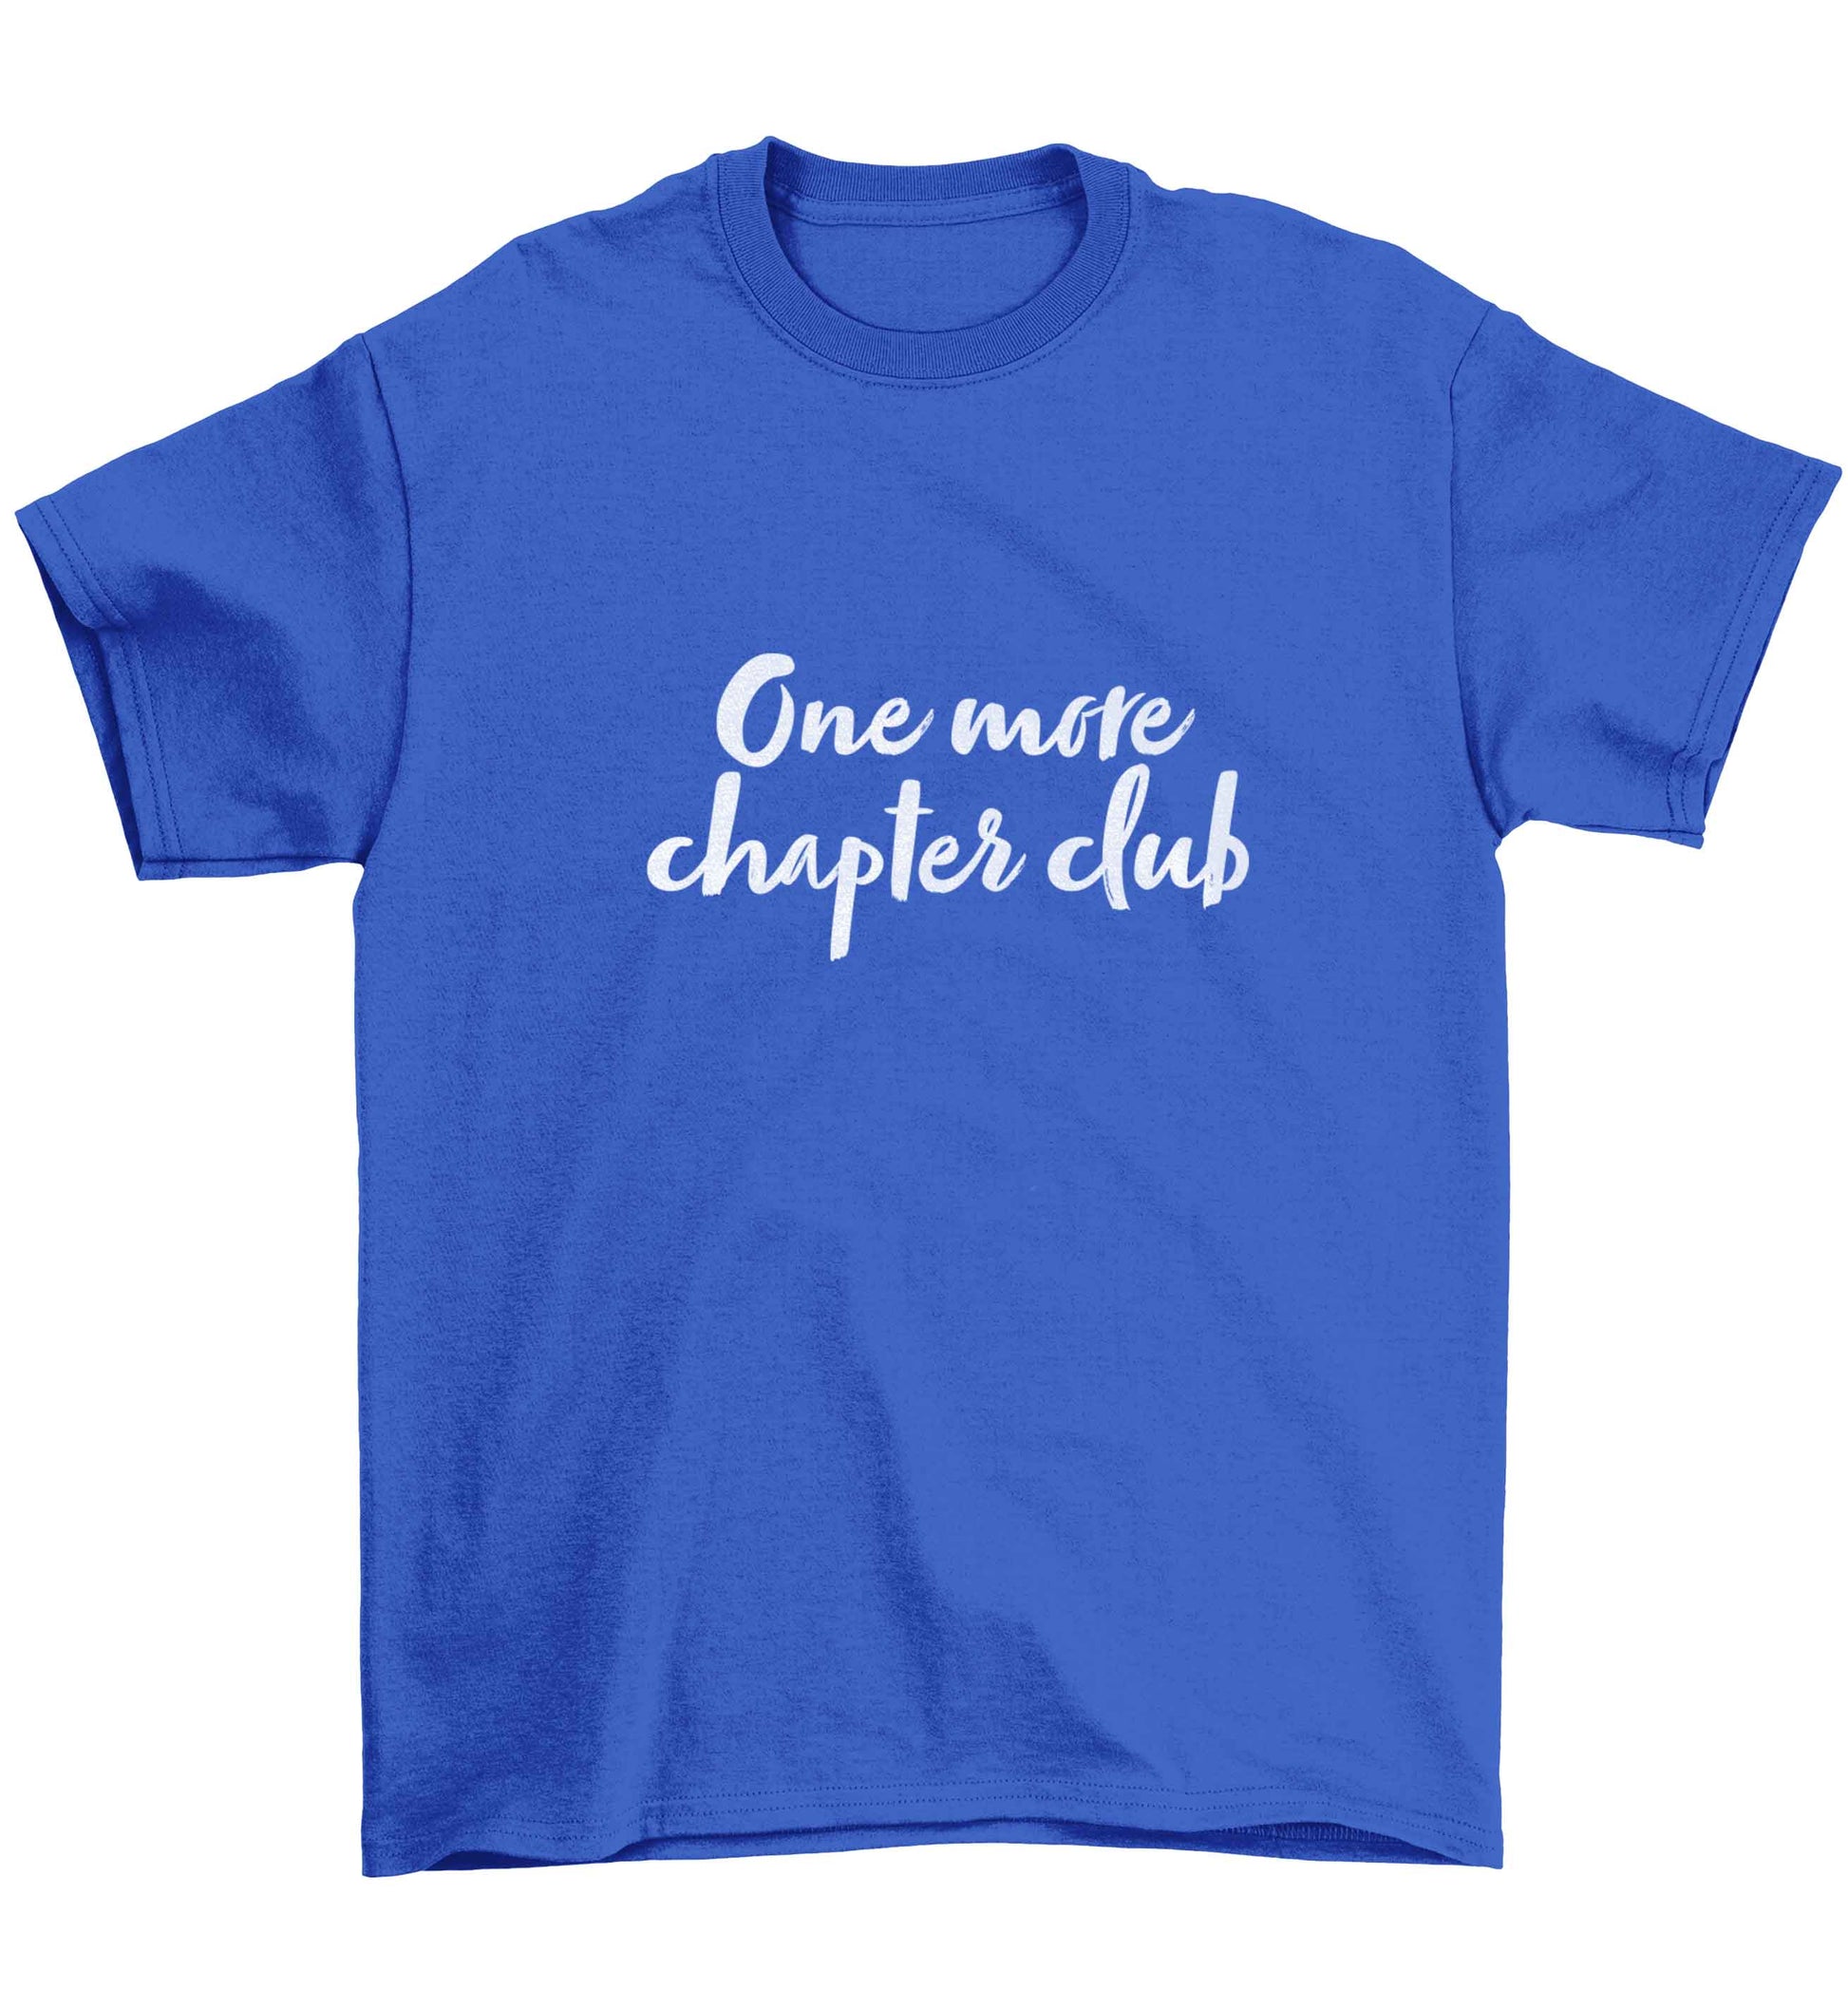 One more chapter club Kit Children's blue Tshirt 12-13 Years